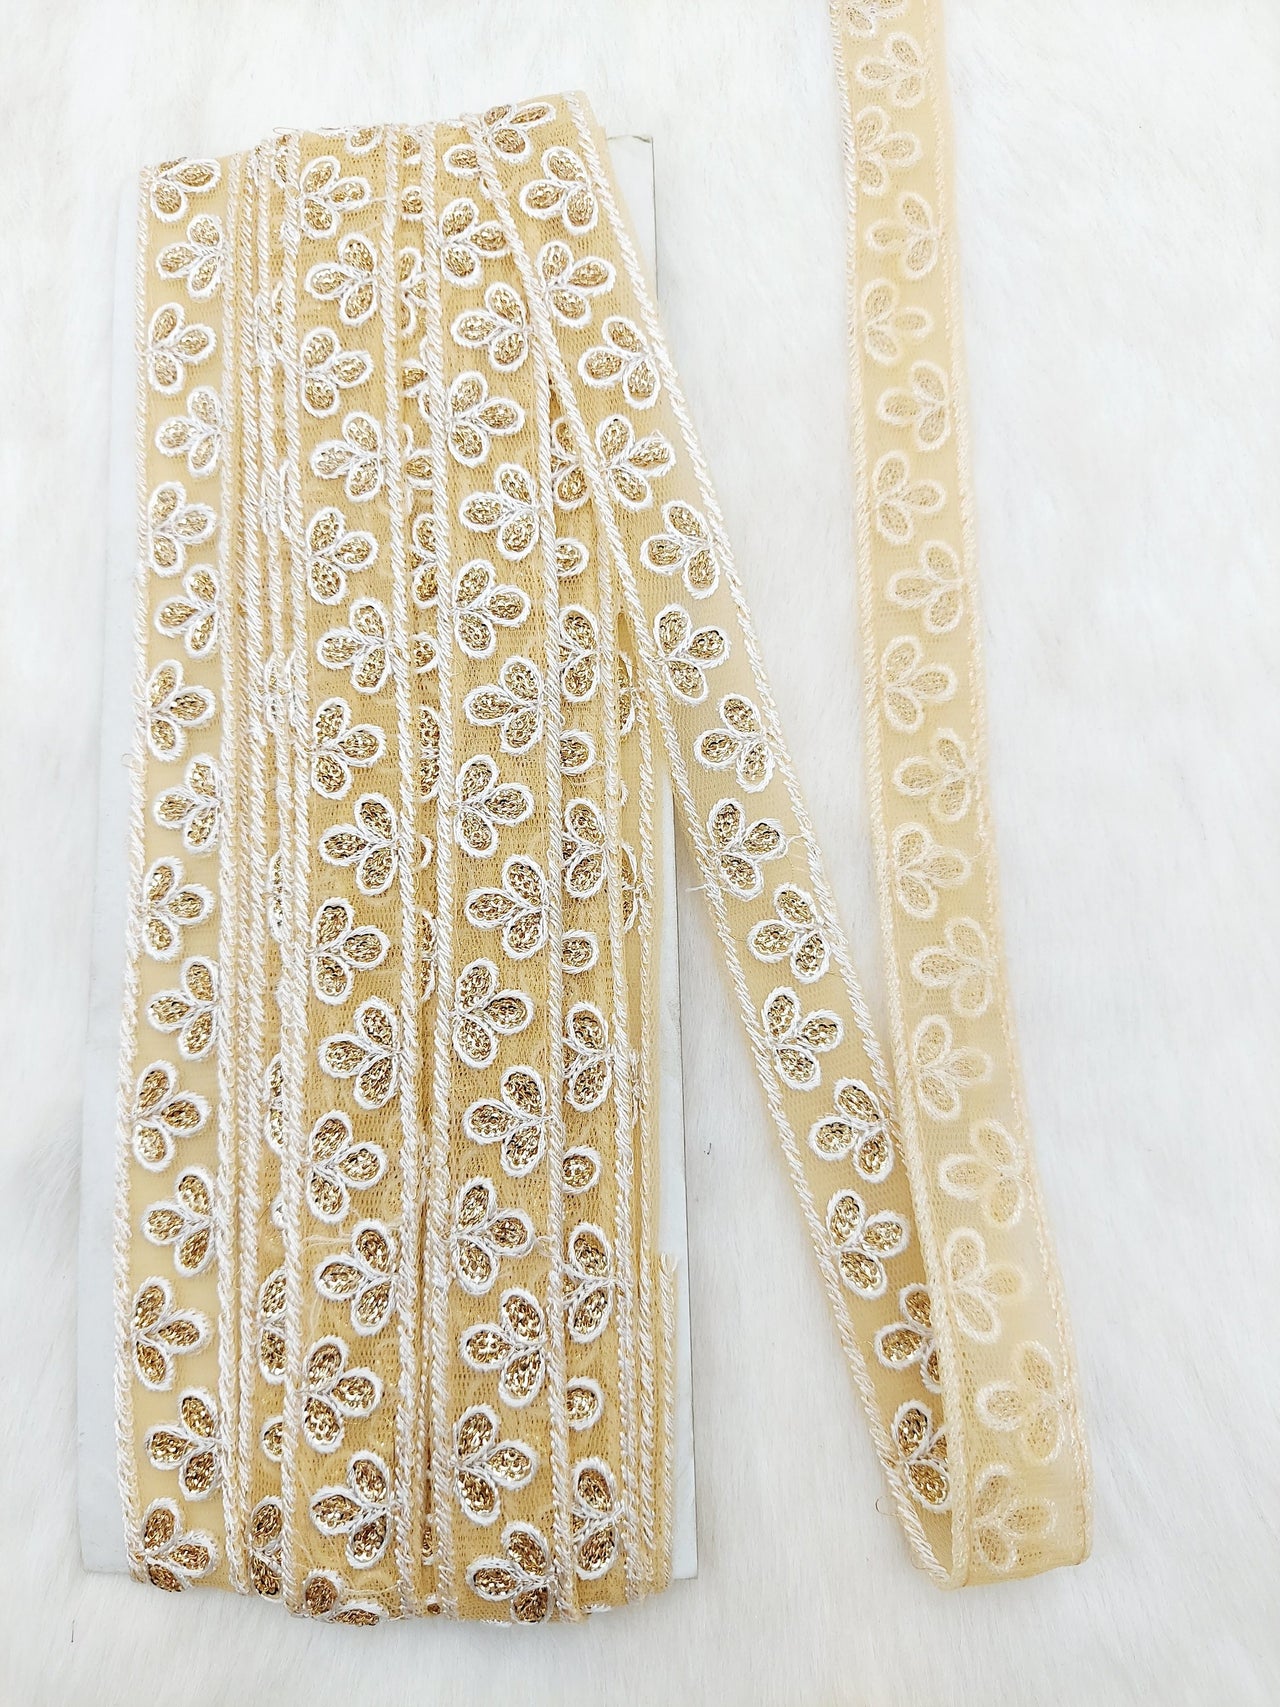 Wholesale Beige Net Lace Trim Floral Embroidery & Glitter Gold Sequins, Indian Wedding Border, Gifting Ribbon Costume Trim Fashion Trimming